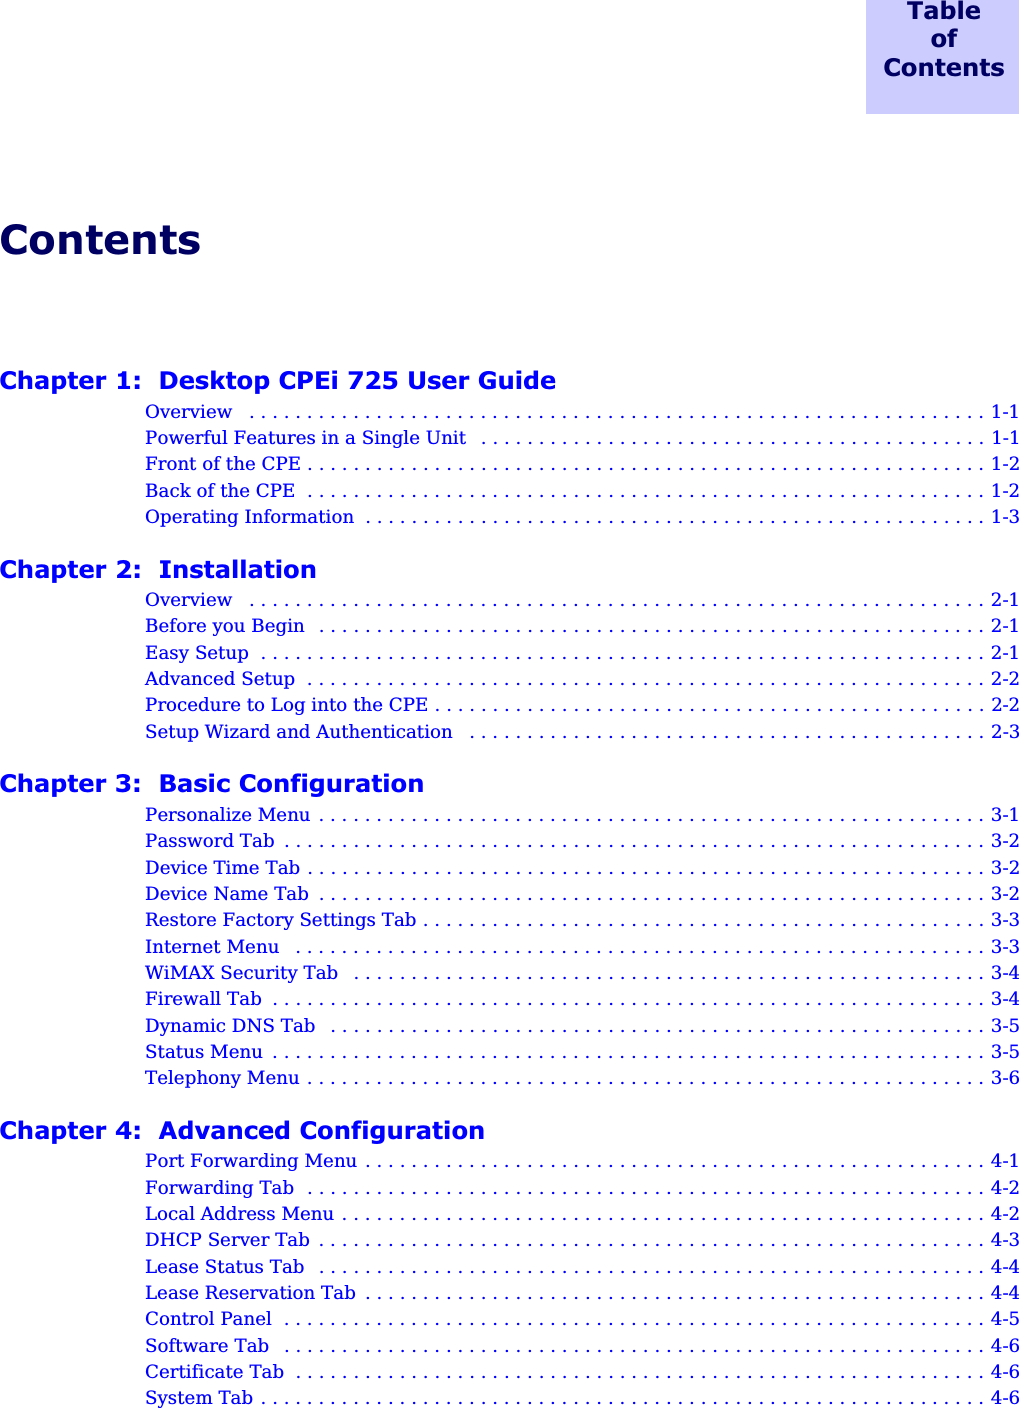 TableofContentsContentsChapter 1:  Desktop CPEi 725 User GuideOverview   . . . . . . . . . . . . . . . . . . . . . . . . . . . . . . . . . . . . . . . . . . . . . . . . . . . . . . . . . . . . . . . . 1-1Powerful Features in a Single Unit   . . . . . . . . . . . . . . . . . . . . . . . . . . . . . . . . . . . . . . . . . . . . 1-1Front of the CPE . . . . . . . . . . . . . . . . . . . . . . . . . . . . . . . . . . . . . . . . . . . . . . . . . . . . . . . . . . . 1-2Back of the CPE  . . . . . . . . . . . . . . . . . . . . . . . . . . . . . . . . . . . . . . . . . . . . . . . . . . . . . . . . . . . 1-2Operating Information  . . . . . . . . . . . . . . . . . . . . . . . . . . . . . . . . . . . . . . . . . . . . . . . . . . . . . . 1-3Chapter 2:  InstallationOverview   . . . . . . . . . . . . . . . . . . . . . . . . . . . . . . . . . . . . . . . . . . . . . . . . . . . . . . . . . . . . . . . . 2-1Before you Begin  . . . . . . . . . . . . . . . . . . . . . . . . . . . . . . . . . . . . . . . . . . . . . . . . . . . . . . . . . . 2-1Easy Setup  . . . . . . . . . . . . . . . . . . . . . . . . . . . . . . . . . . . . . . . . . . . . . . . . . . . . . . . . . . . . . . . 2-1Advanced Setup  . . . . . . . . . . . . . . . . . . . . . . . . . . . . . . . . . . . . . . . . . . . . . . . . . . . . . . . . . . . 2-2Procedure to Log into the CPE . . . . . . . . . . . . . . . . . . . . . . . . . . . . . . . . . . . . . . . . . . . . . . . . 2-2Setup Wizard and Authentication   . . . . . . . . . . . . . . . . . . . . . . . . . . . . . . . . . . . . . . . . . . . . . 2-3Chapter 3:  Basic ConfigurationPersonalize Menu . . . . . . . . . . . . . . . . . . . . . . . . . . . . . . . . . . . . . . . . . . . . . . . . . . . . . . . . . . 3-1Password Tab  . . . . . . . . . . . . . . . . . . . . . . . . . . . . . . . . . . . . . . . . . . . . . . . . . . . . . . . . . . . . . 3-2Device Time Tab . . . . . . . . . . . . . . . . . . . . . . . . . . . . . . . . . . . . . . . . . . . . . . . . . . . . . . . . . . . 3-2Device Name Tab  . . . . . . . . . . . . . . . . . . . . . . . . . . . . . . . . . . . . . . . . . . . . . . . . . . . . . . . . . . 3-2Restore Factory Settings Tab . . . . . . . . . . . . . . . . . . . . . . . . . . . . . . . . . . . . . . . . . . . . . . . . . 3-3Internet Menu   . . . . . . . . . . . . . . . . . . . . . . . . . . . . . . . . . . . . . . . . . . . . . . . . . . . . . . . . . . . . 3-3WiMAX Security Tab   . . . . . . . . . . . . . . . . . . . . . . . . . . . . . . . . . . . . . . . . . . . . . . . . . . . . . . . 3-4Firewall Tab  . . . . . . . . . . . . . . . . . . . . . . . . . . . . . . . . . . . . . . . . . . . . . . . . . . . . . . . . . . . . . . 3-4Dynamic DNS Tab   . . . . . . . . . . . . . . . . . . . . . . . . . . . . . . . . . . . . . . . . . . . . . . . . . . . . . . . . . 3-5Status Menu  . . . . . . . . . . . . . . . . . . . . . . . . . . . . . . . . . . . . . . . . . . . . . . . . . . . . . . . . . . . . . . 3-5Telephony Menu . . . . . . . . . . . . . . . . . . . . . . . . . . . . . . . . . . . . . . . . . . . . . . . . . . . . . . . . . . . 3-6Chapter 4:  Advanced ConfigurationPort Forwarding Menu . . . . . . . . . . . . . . . . . . . . . . . . . . . . . . . . . . . . . . . . . . . . . . . . . . . . . . 4-1Forwarding Tab  . . . . . . . . . . . . . . . . . . . . . . . . . . . . . . . . . . . . . . . . . . . . . . . . . . . . . . . . . . . 4-2Local Address Menu . . . . . . . . . . . . . . . . . . . . . . . . . . . . . . . . . . . . . . . . . . . . . . . . . . . . . . . . 4-2DHCP Server Tab . . . . . . . . . . . . . . . . . . . . . . . . . . . . . . . . . . . . . . . . . . . . . . . . . . . . . . . . . . 4-3Lease Status Tab  . . . . . . . . . . . . . . . . . . . . . . . . . . . . . . . . . . . . . . . . . . . . . . . . . . . . . . . . . . 4-4Lease Reservation Tab  . . . . . . . . . . . . . . . . . . . . . . . . . . . . . . . . . . . . . . . . . . . . . . . . . . . . . . 4-4Control Panel  . . . . . . . . . . . . . . . . . . . . . . . . . . . . . . . . . . . . . . . . . . . . . . . . . . . . . . . . . . . . . 4-5Software Tab   . . . . . . . . . . . . . . . . . . . . . . . . . . . . . . . . . . . . . . . . . . . . . . . . . . . . . . . . . . . . . 4-6Certificate Tab  . . . . . . . . . . . . . . . . . . . . . . . . . . . . . . . . . . . . . . . . . . . . . . . . . . . . . . . . . . . . 4-6System Tab . . . . . . . . . . . . . . . . . . . . . . . . . . . . . . . . . . . . . . . . . . . . . . . . . . . . . . . . . . . . . . . 4-6